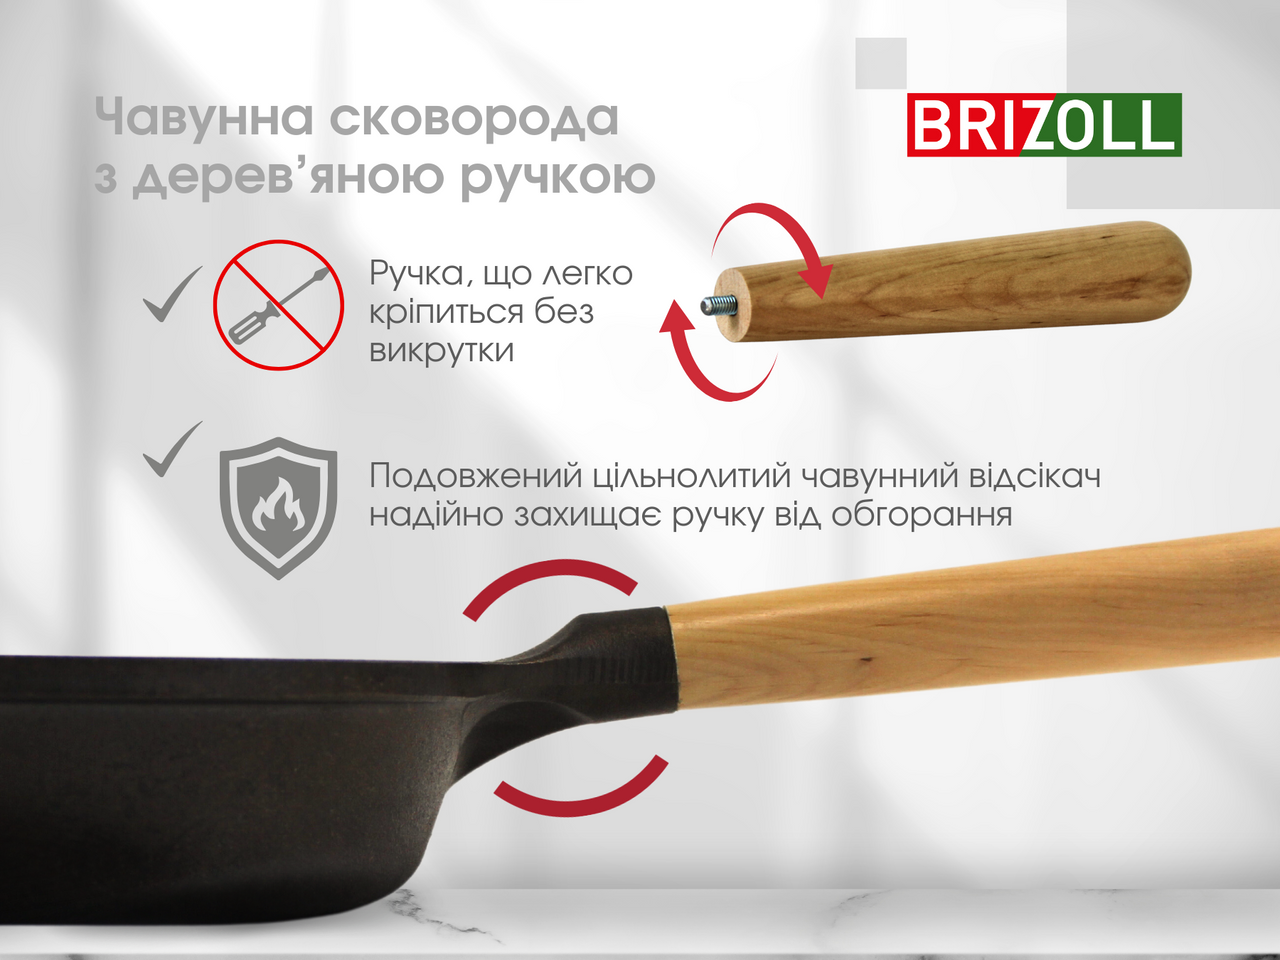 Cast iron pan NEXT 220 х 40 mm with a glass lid